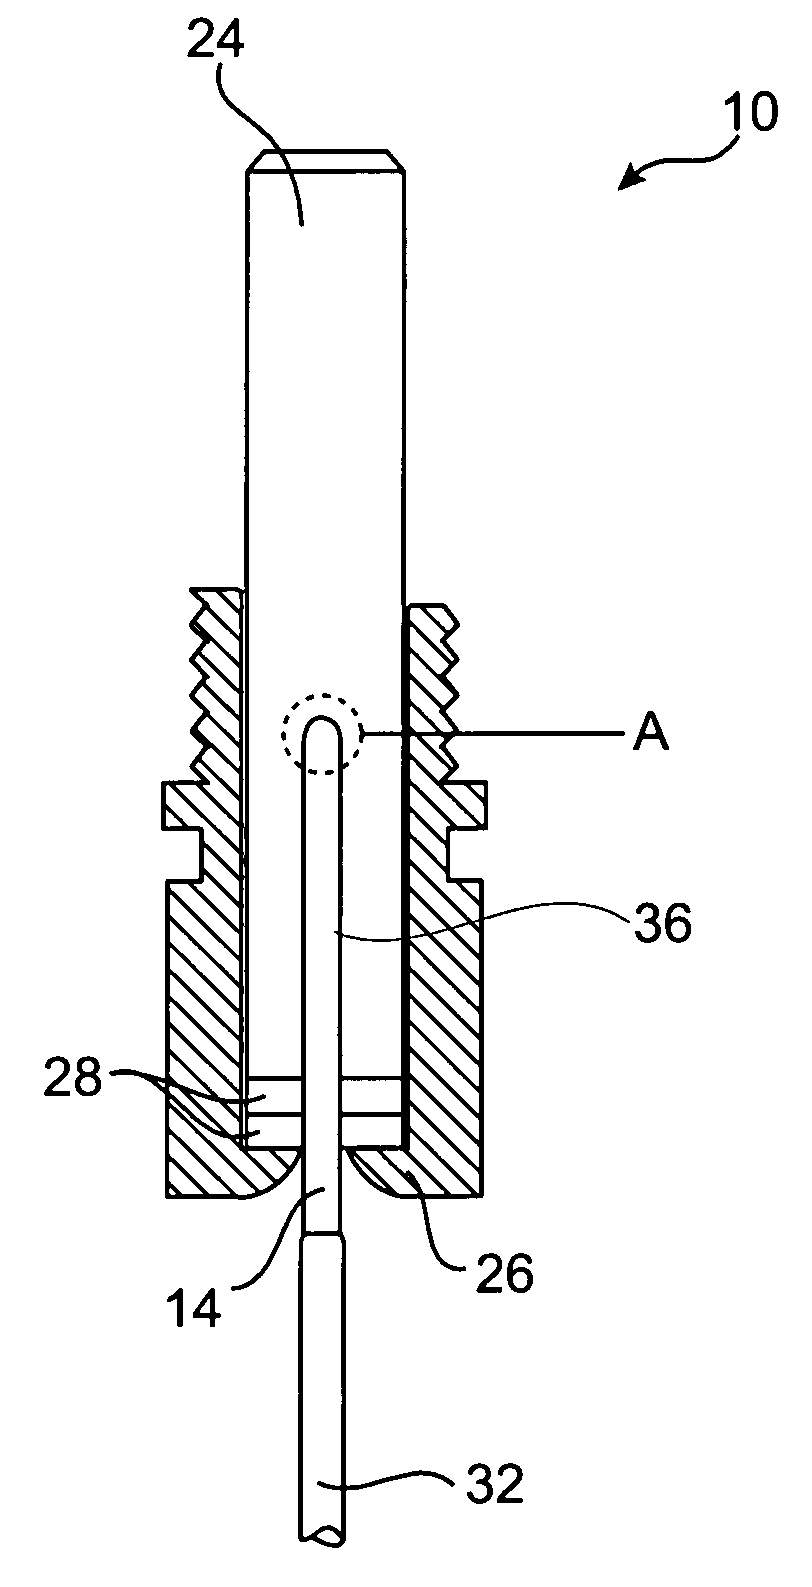 Temperature sensing system for temperature measurement in a high radio frequency environment